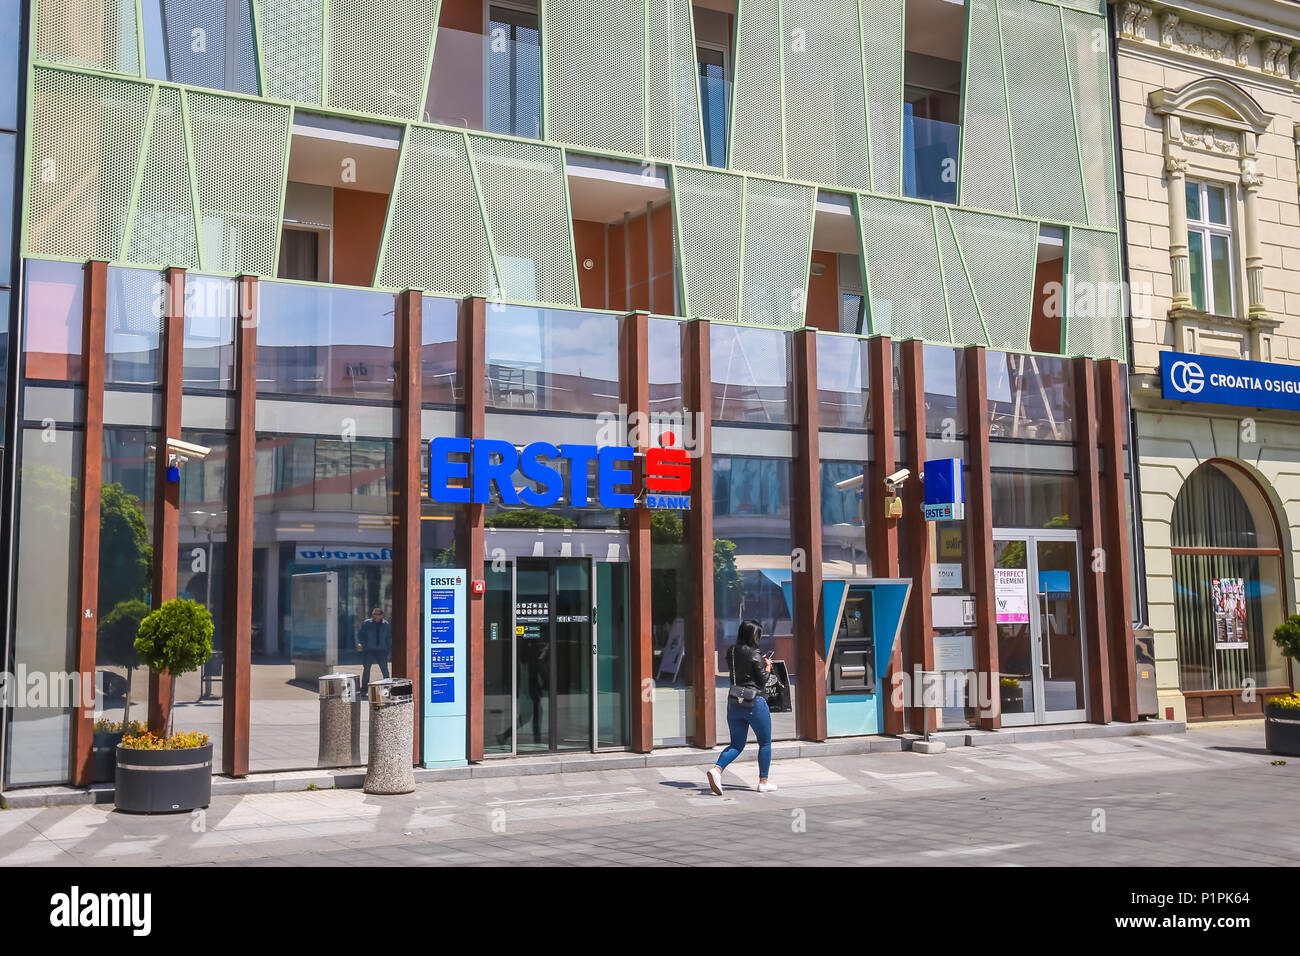 VUKOVAR, CROATIA - MAY 14, 2018 : A young woman walking in front of the Erste bank building in Vukovar, Croatia. Stock Photo